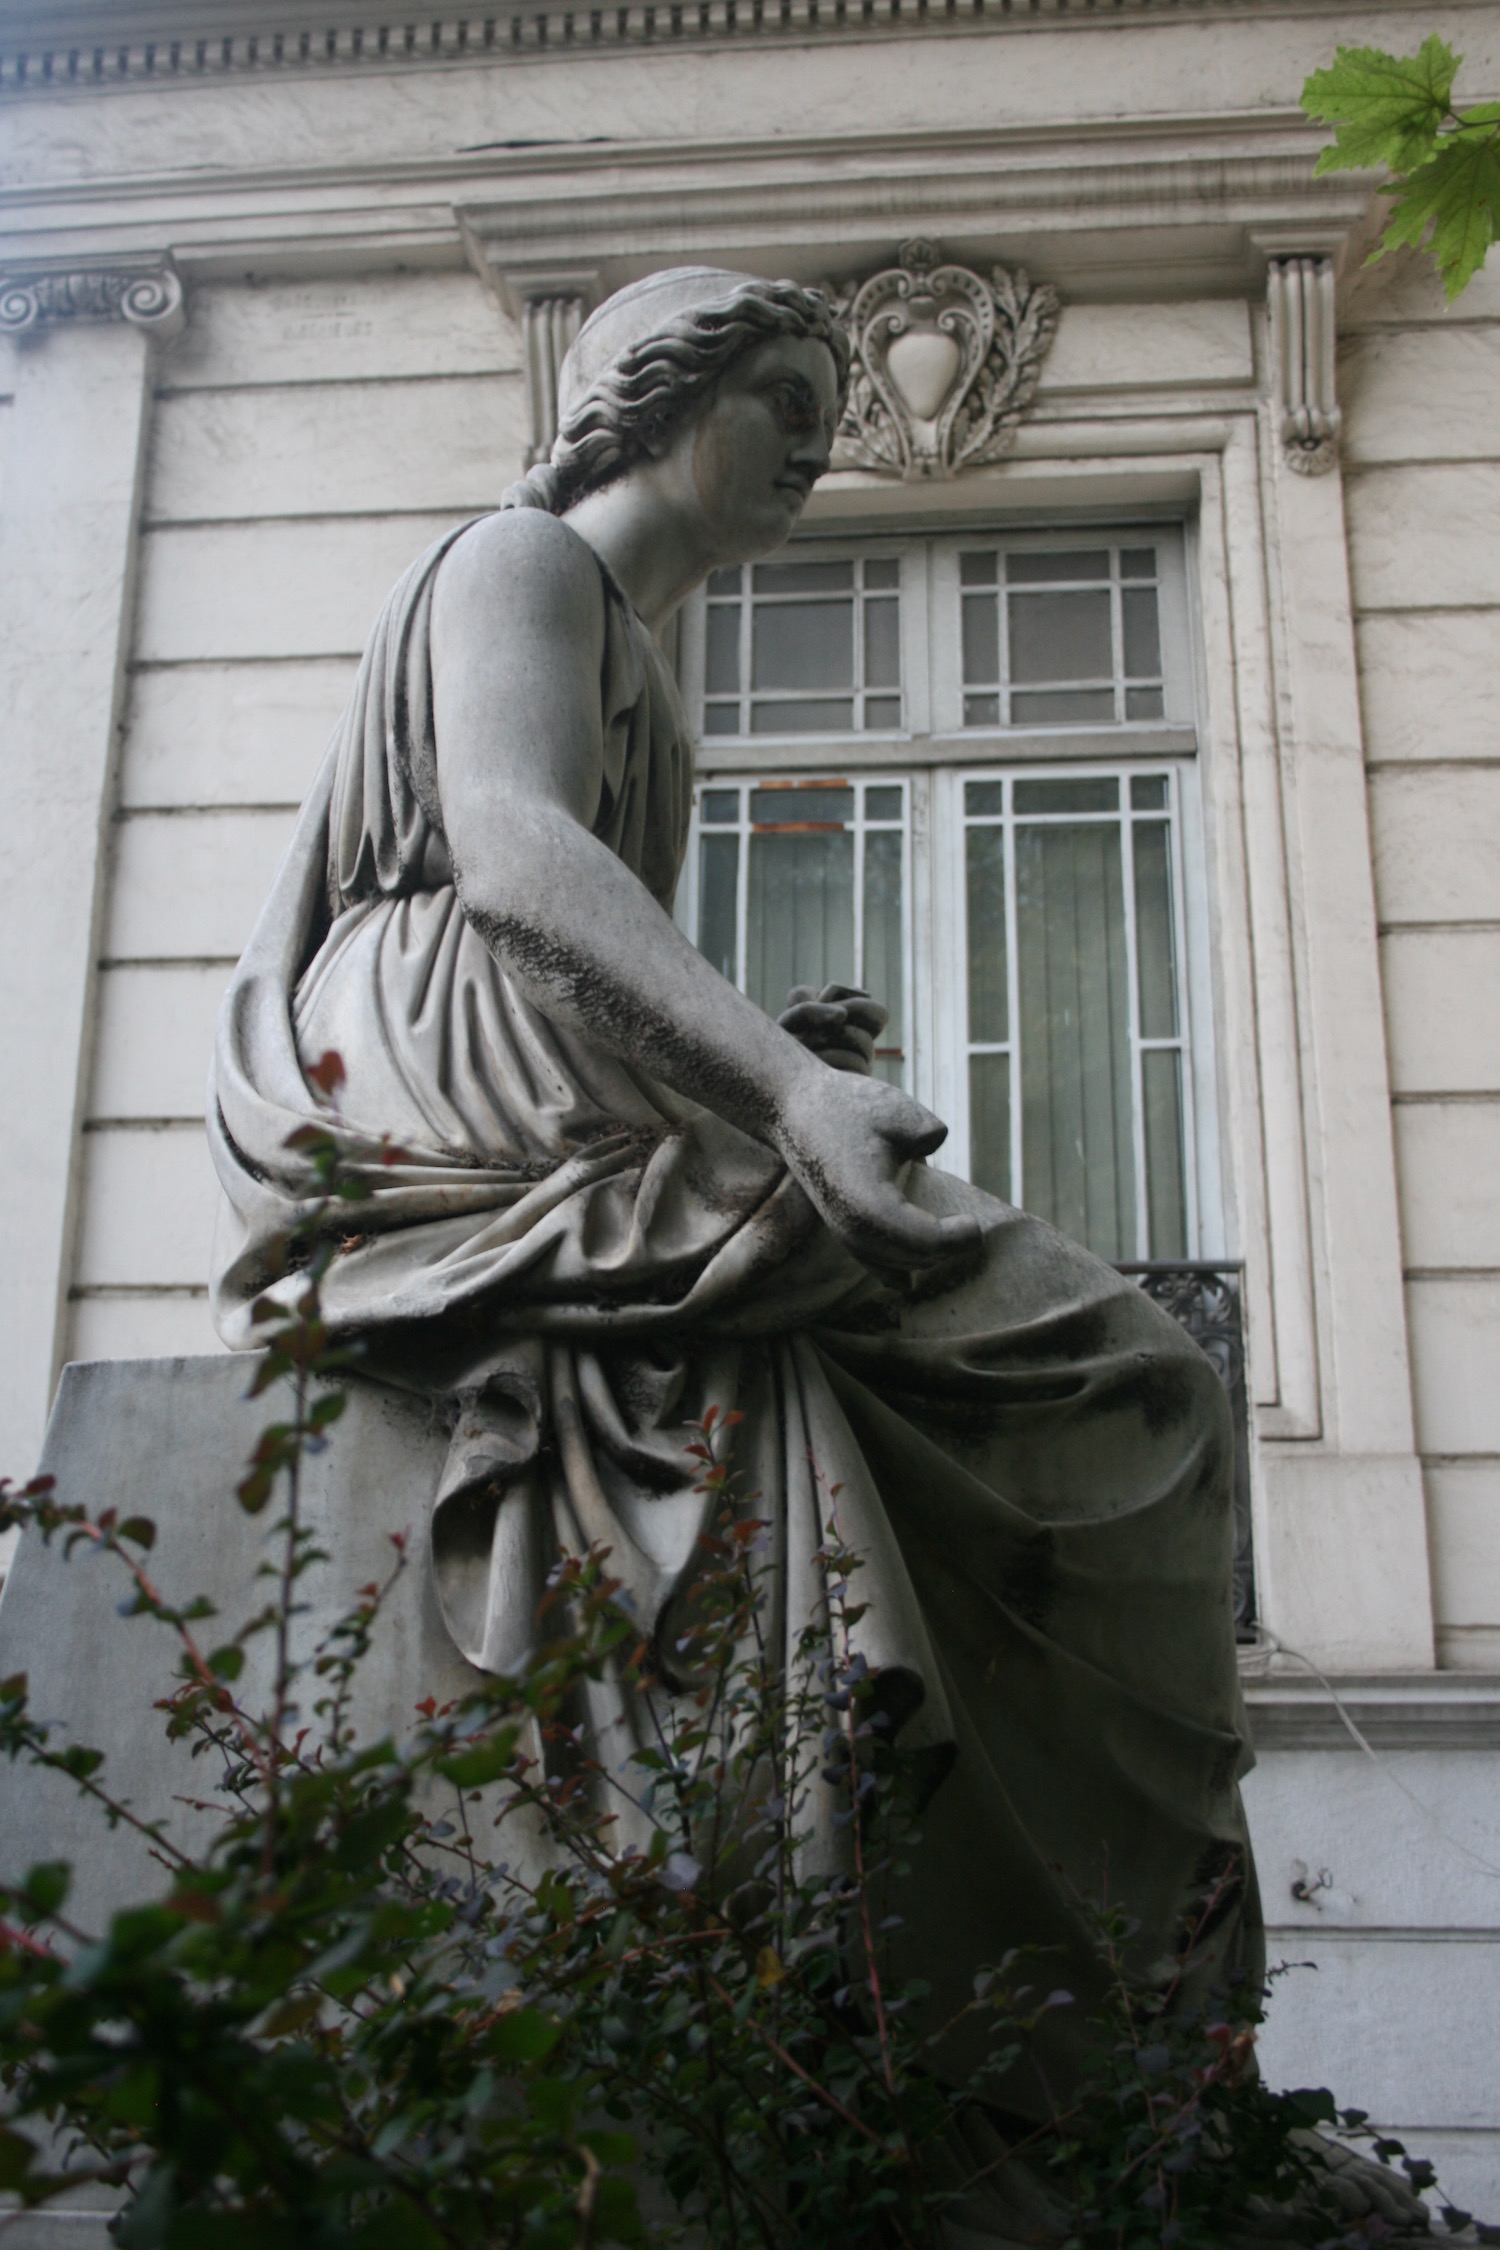 a statue of a woman sitting on a pedestal